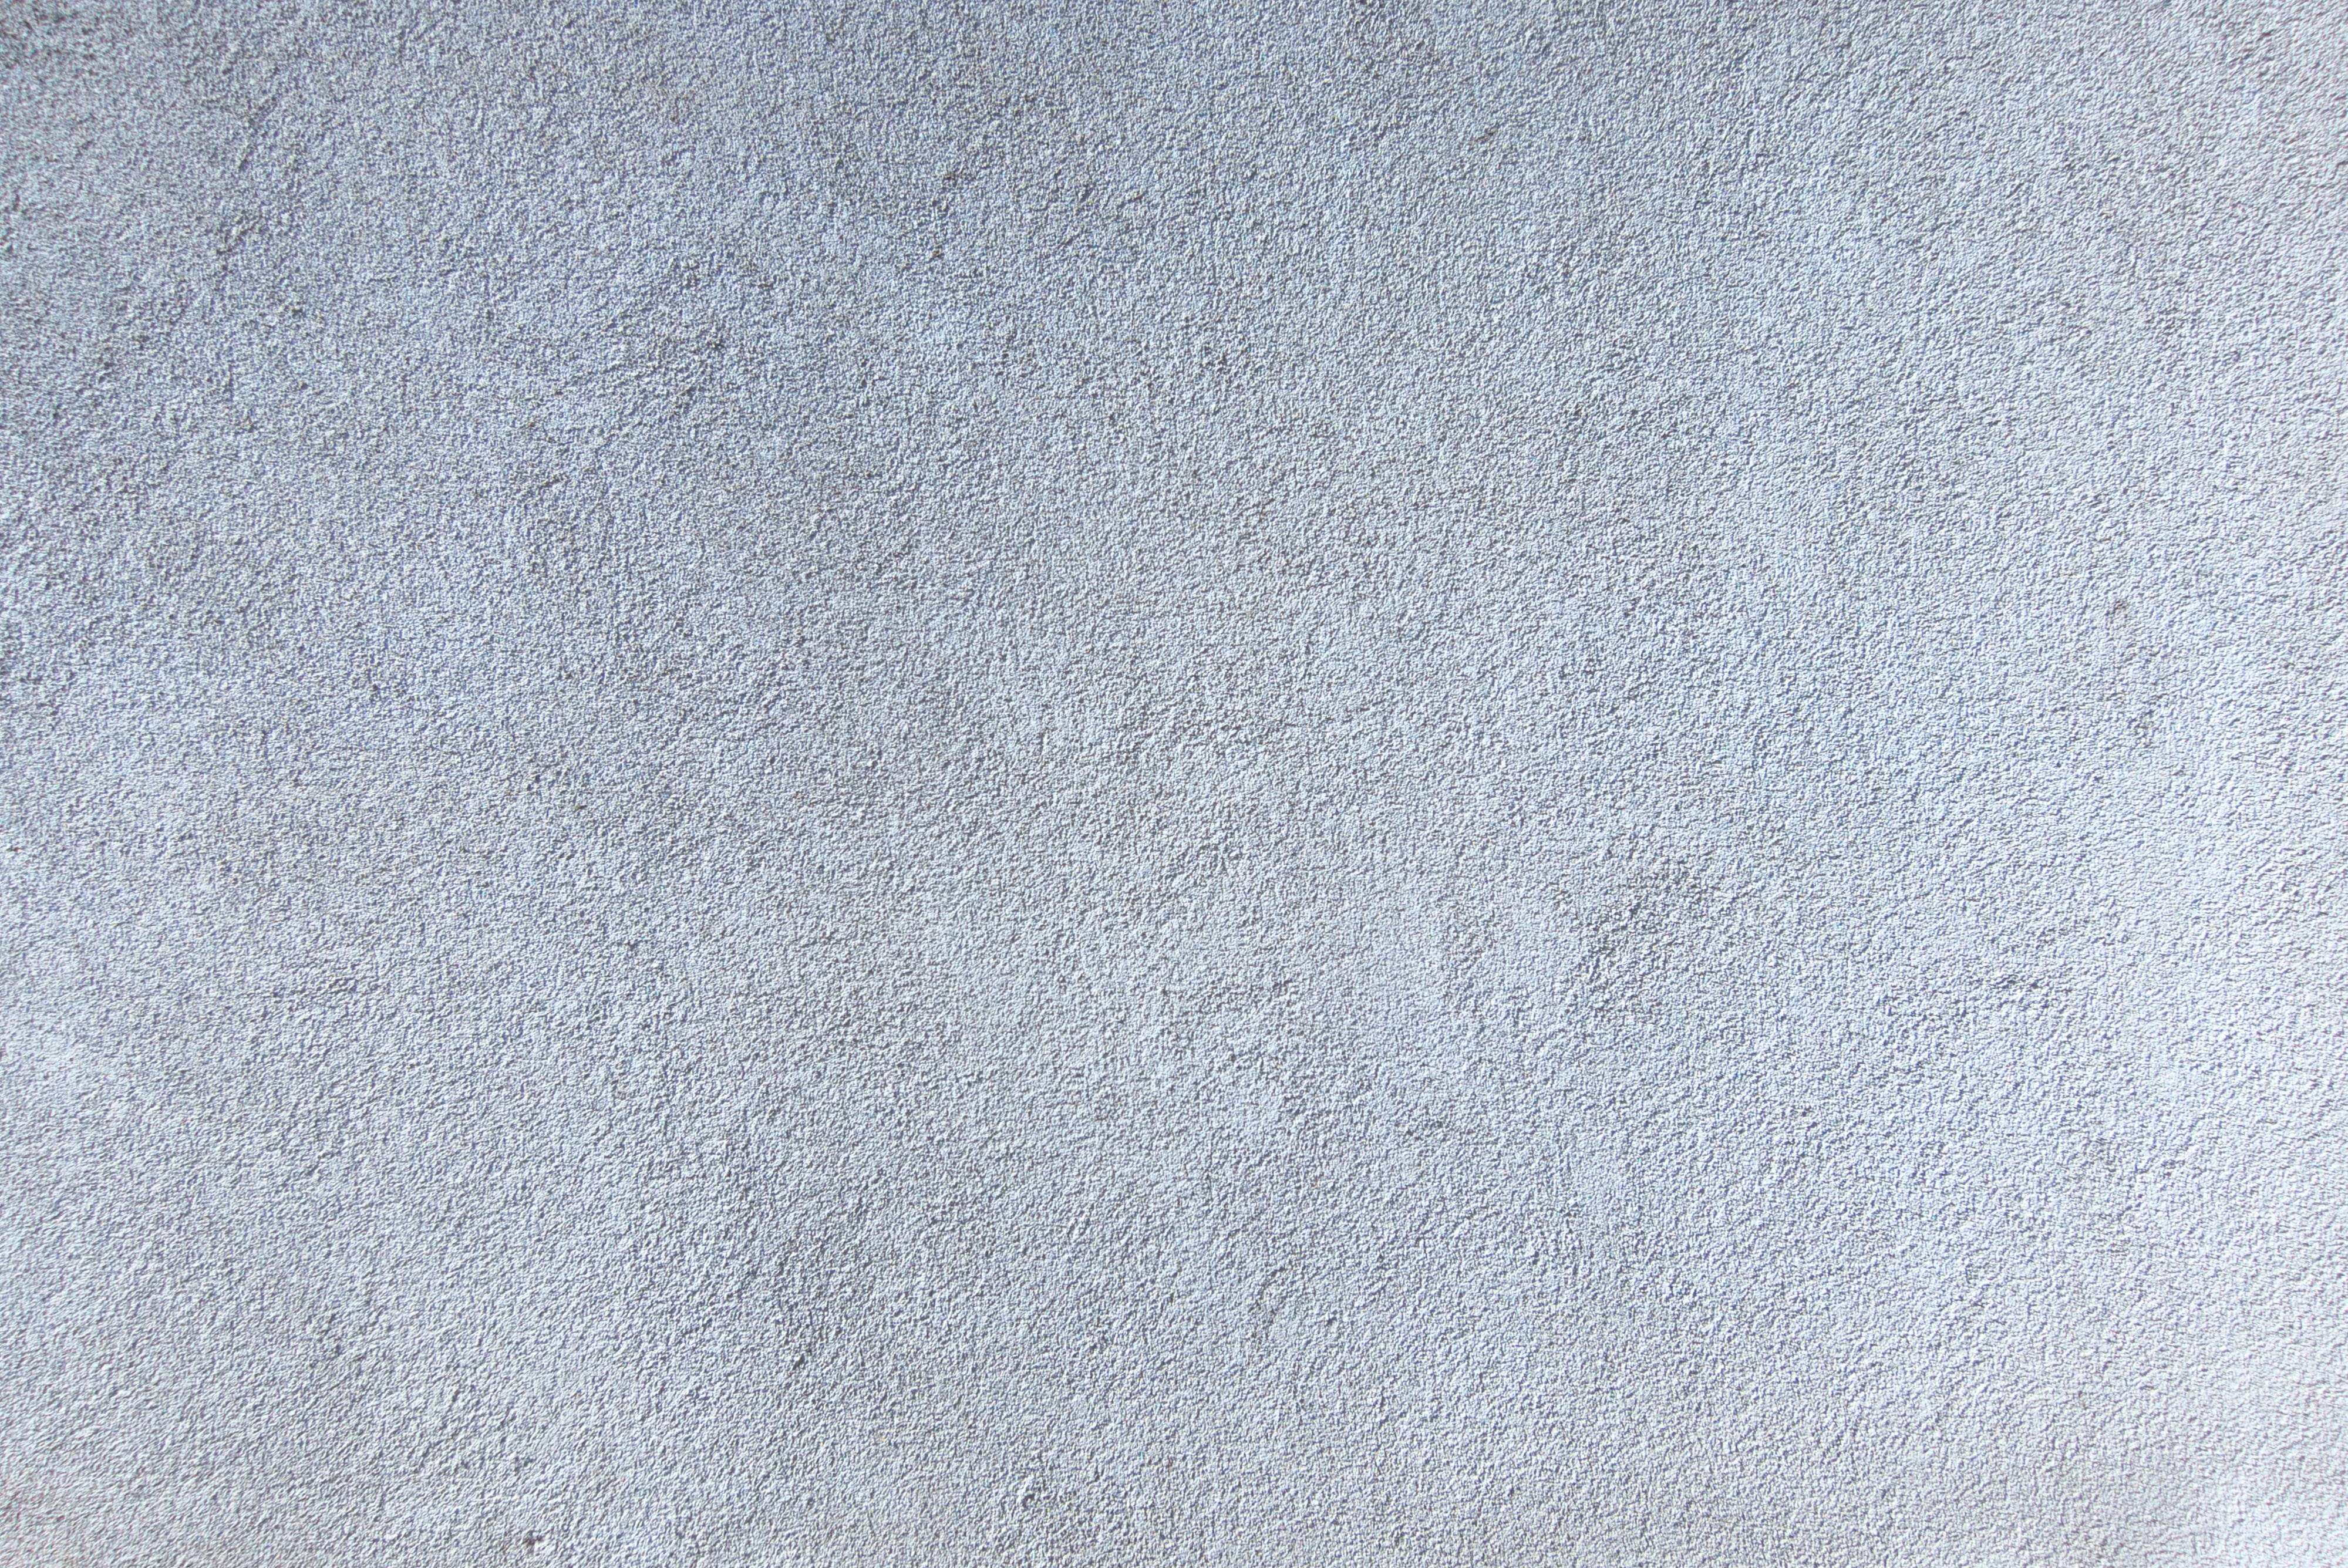 gray surface, plaster, texture, structure, pattern, wall, urban